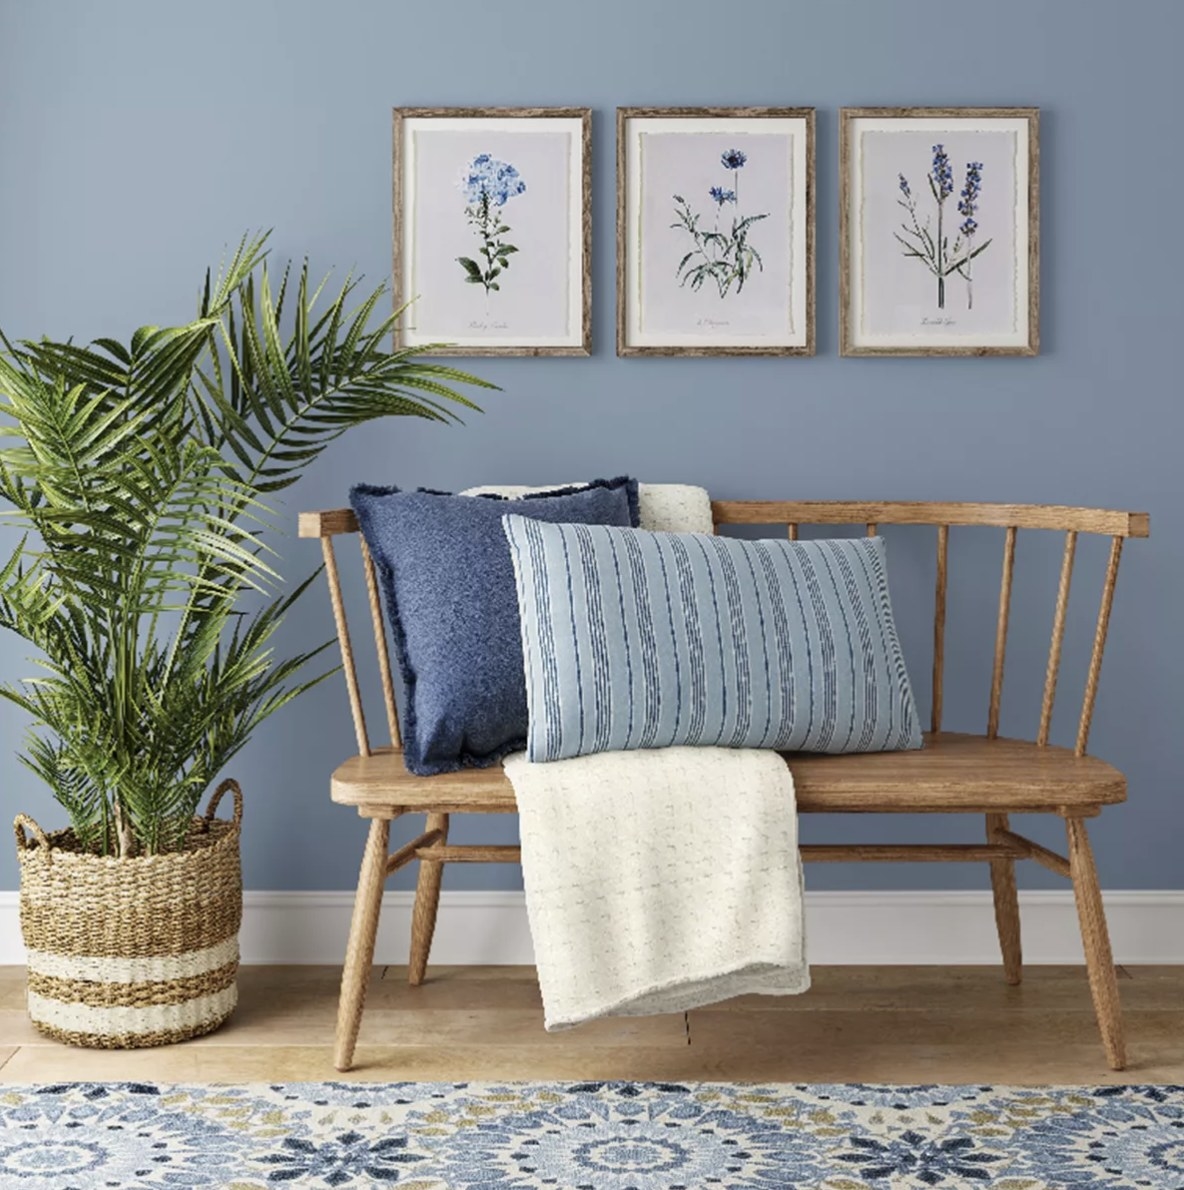 The set of three flower prints is hung on a blue wall and surrounded by rustic furniture